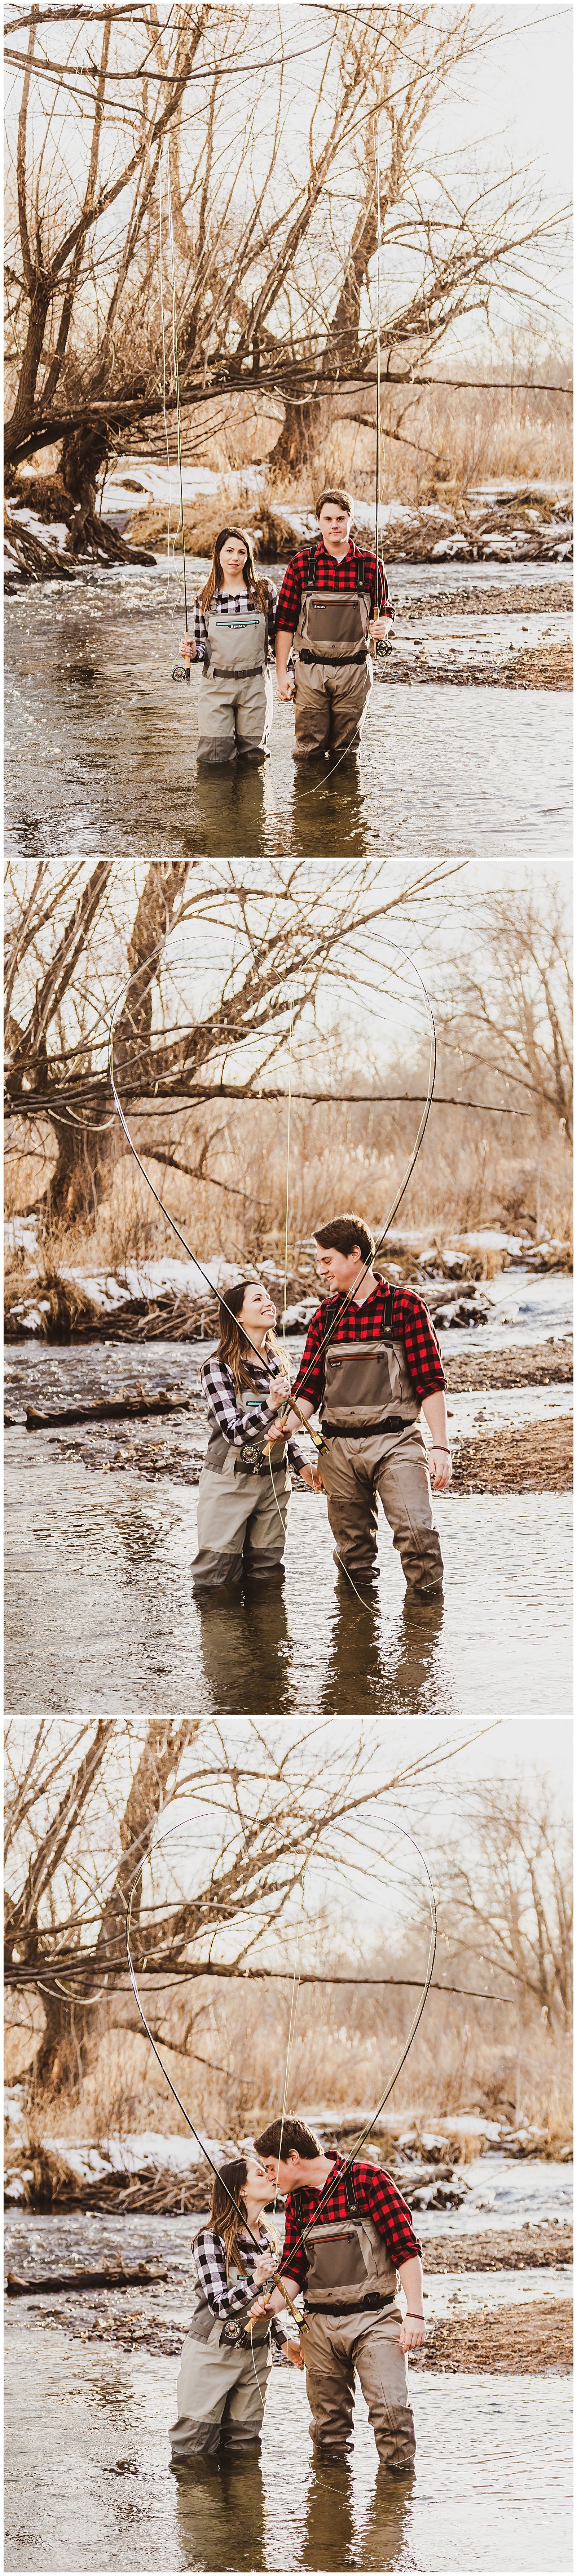 fly fishing engagement session during winter